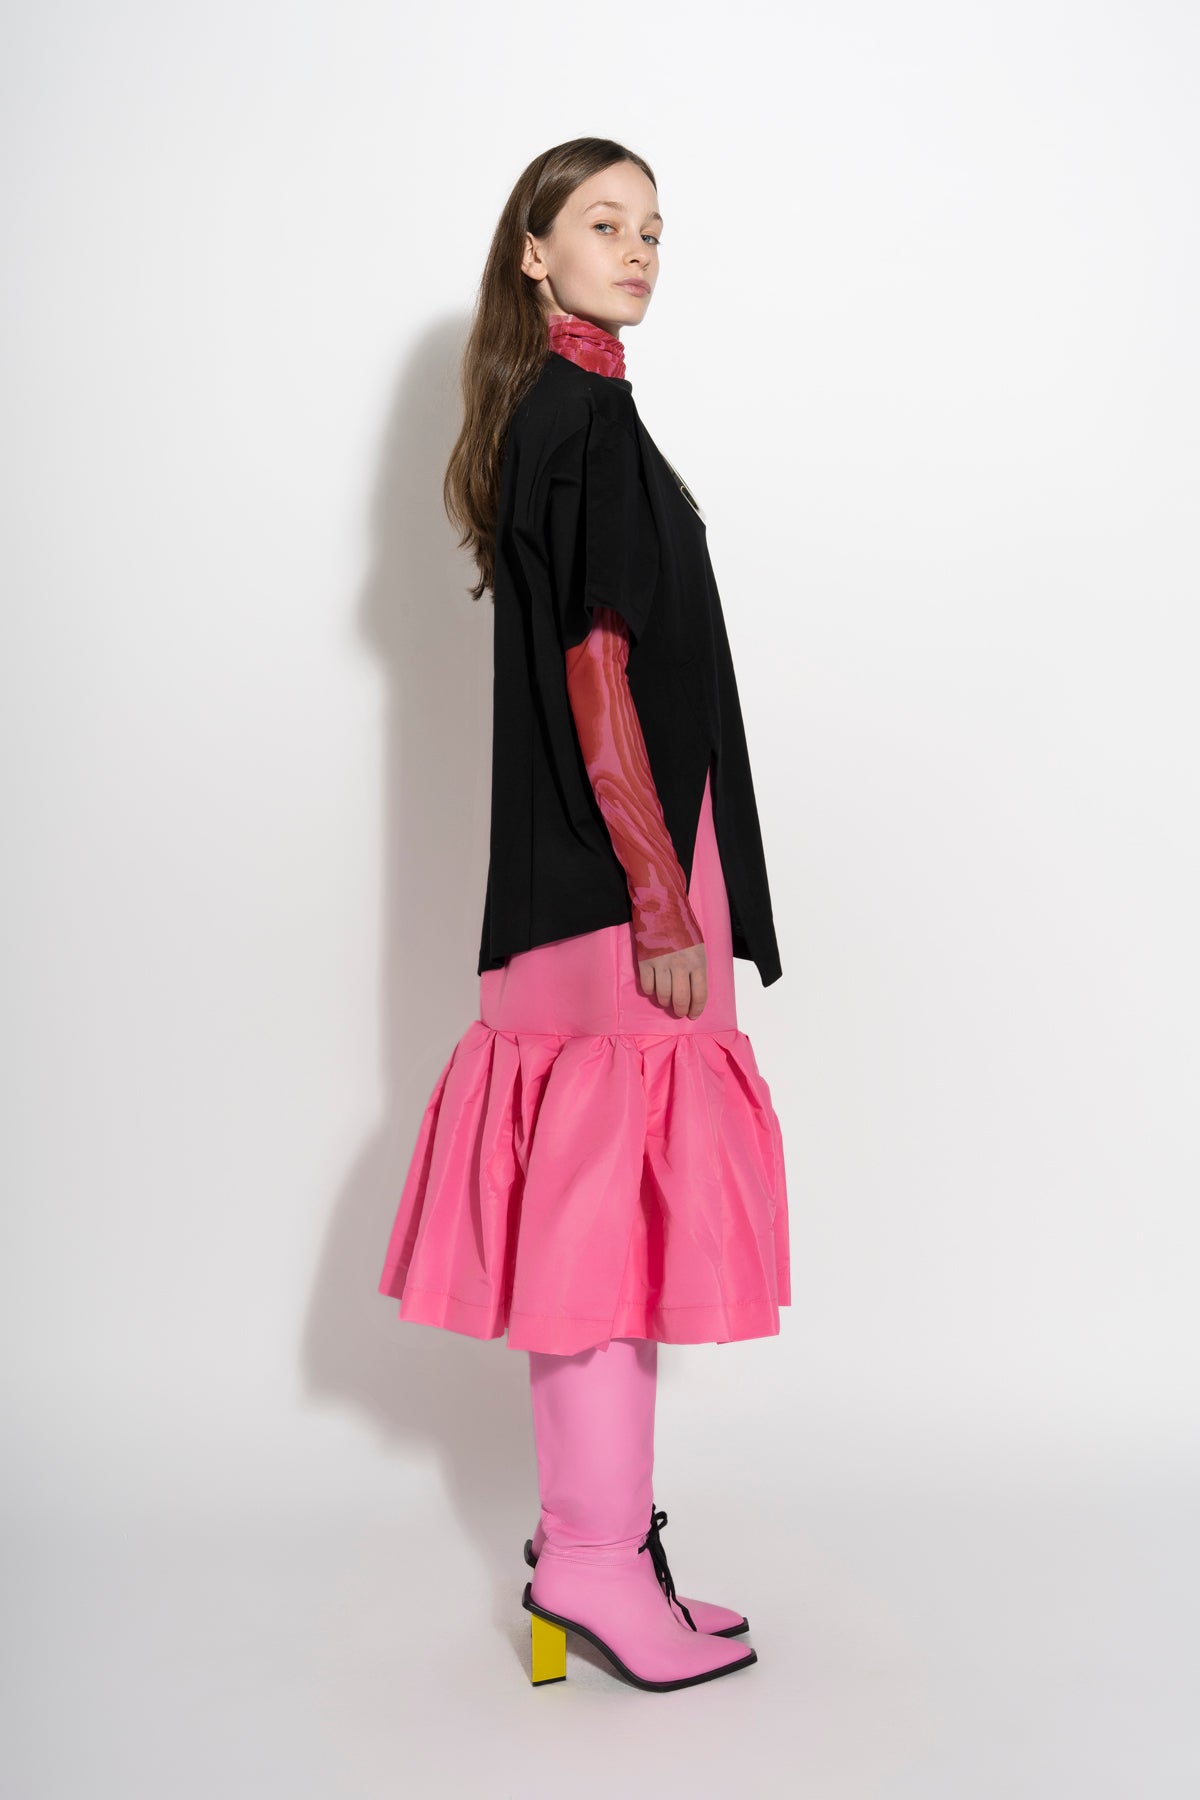 PINK FITTED SKIRT marques almeida